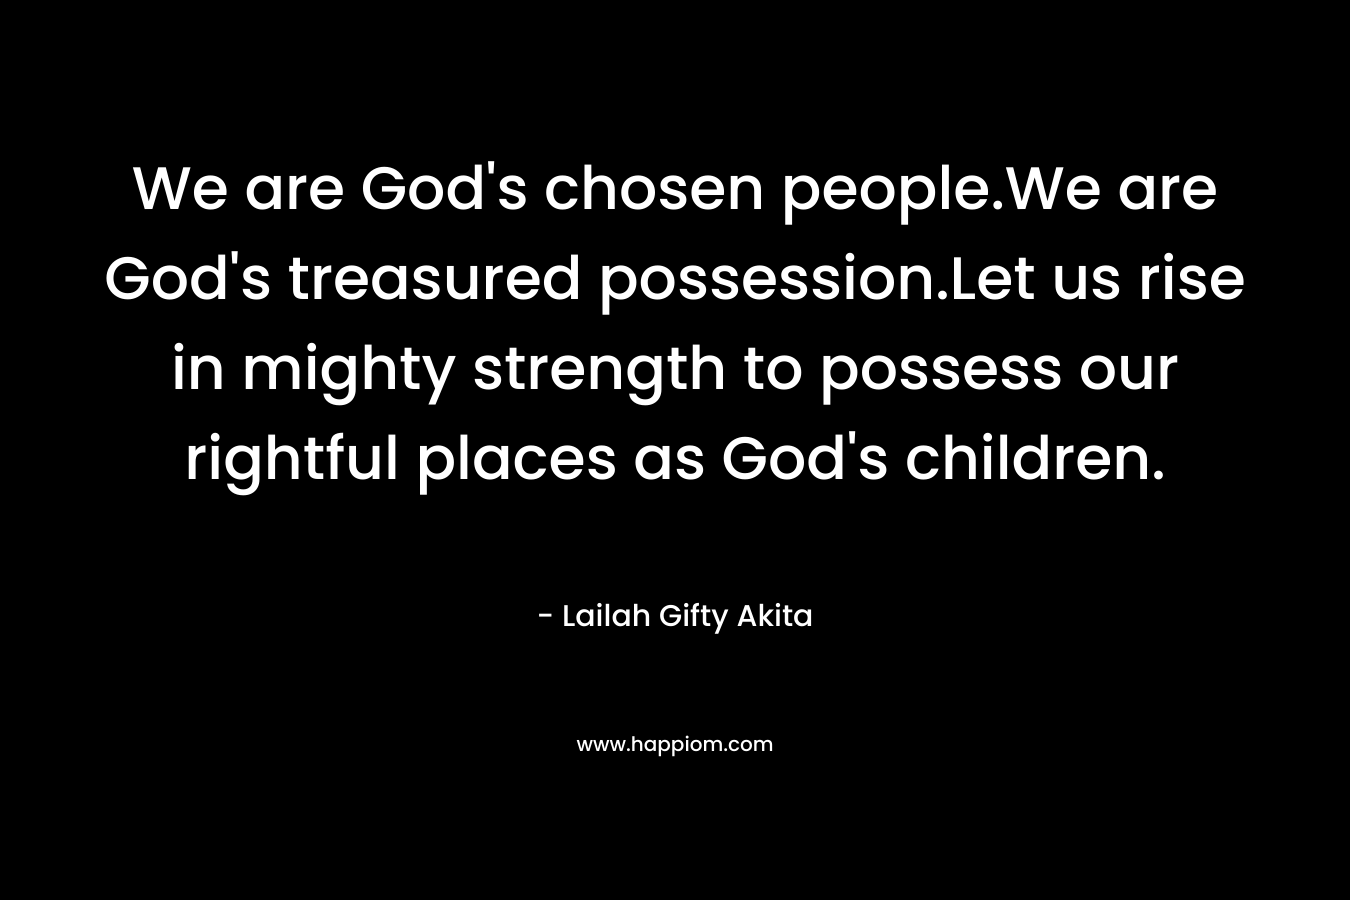 We are God’s chosen people.We are God’s treasured possession.Let us rise in mighty strength to possess our rightful places as God’s children. – Lailah Gifty Akita